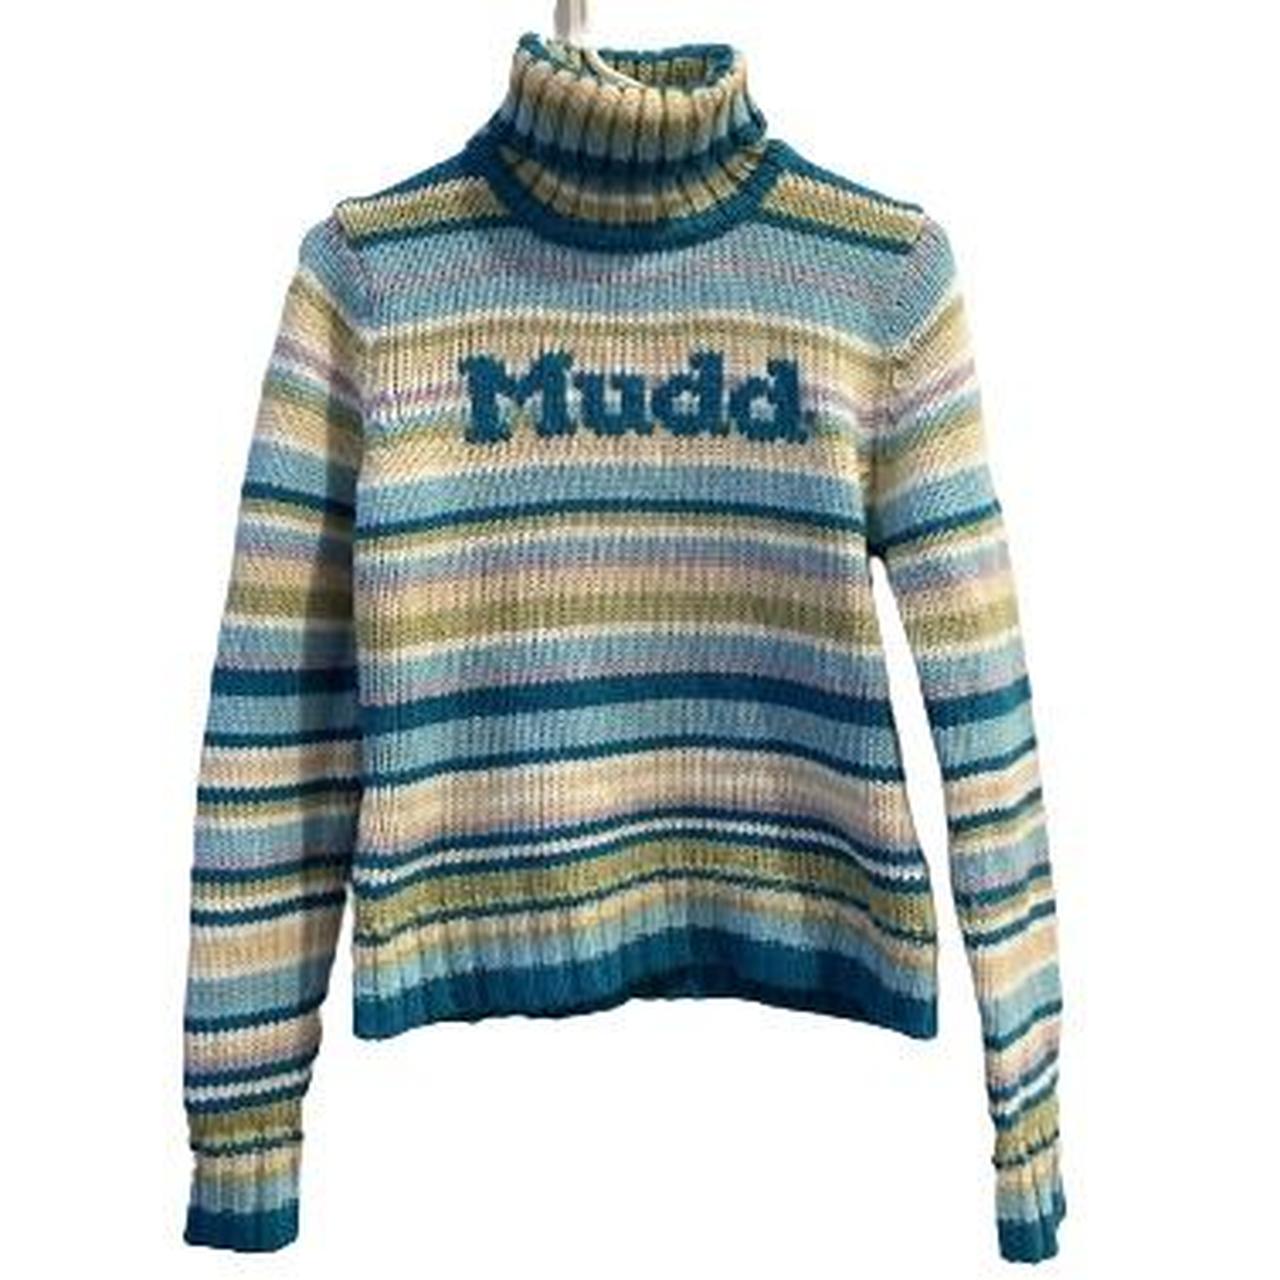 Mudd Clothing Women's Blue and Green Jumper